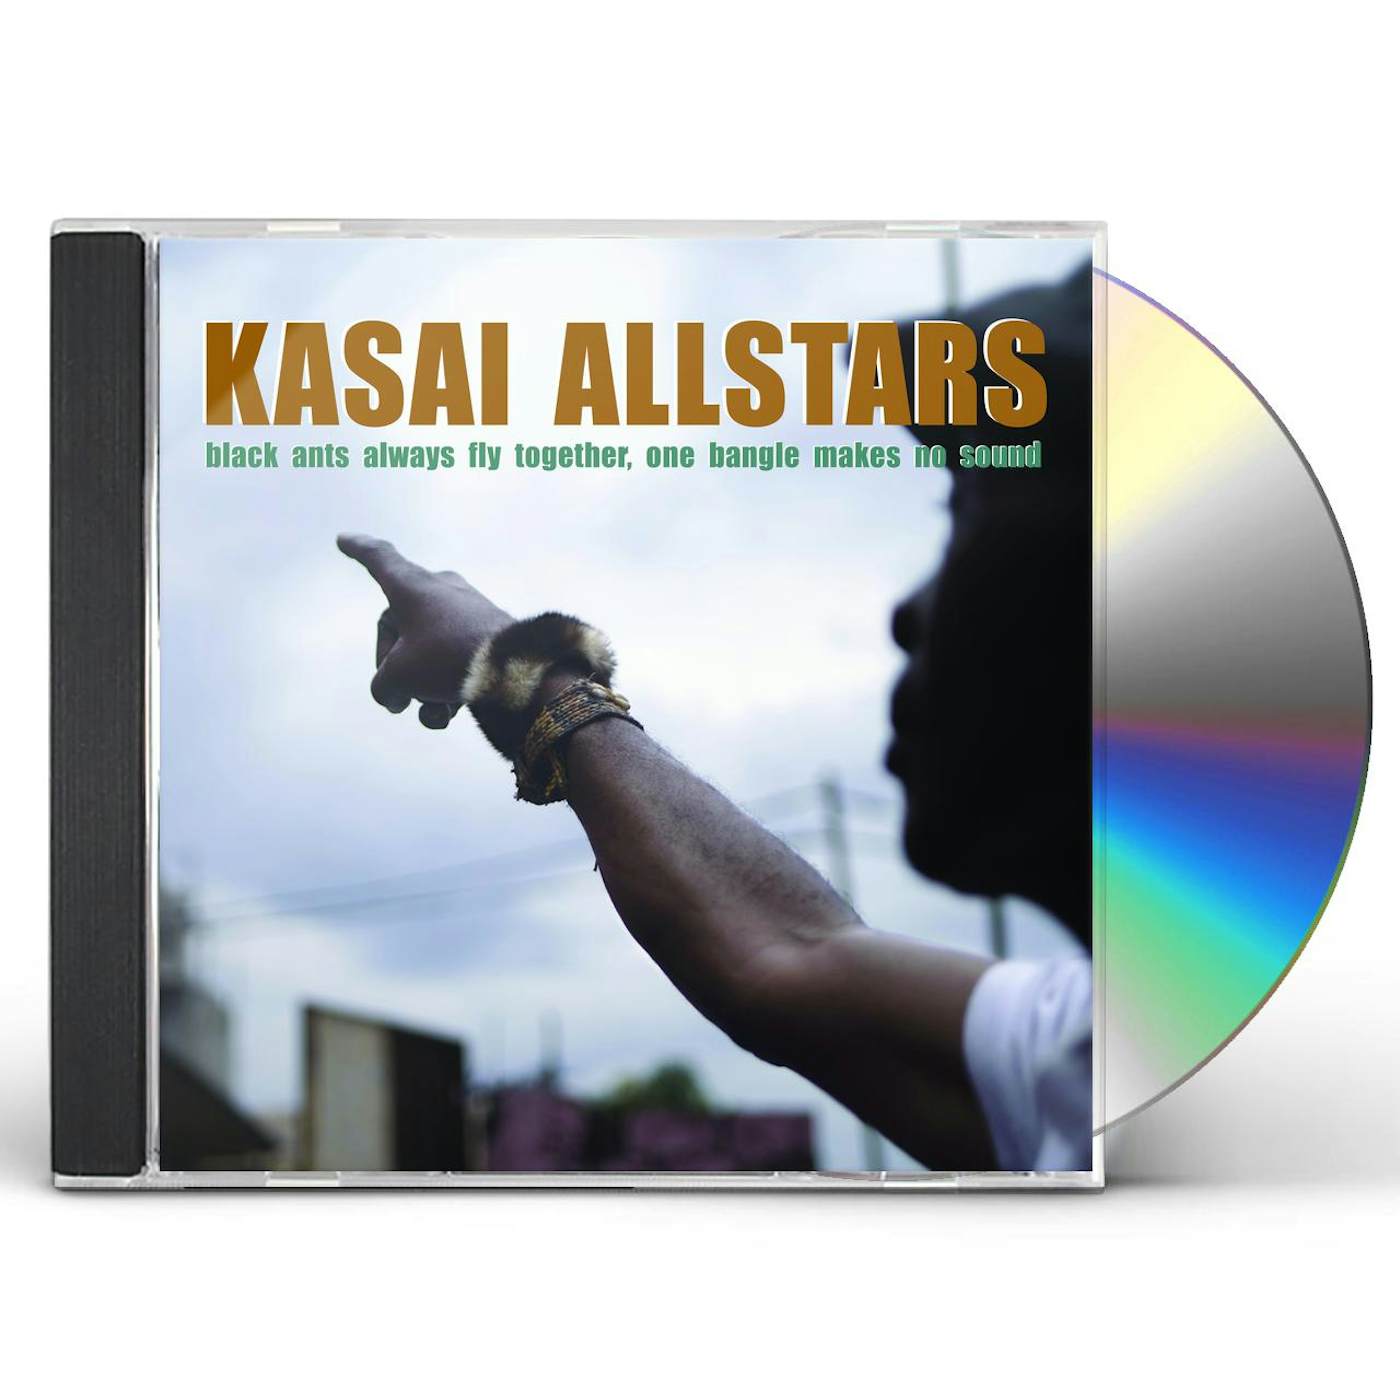 Kasai Allstars BLACK ANTS ALWAYS FLY TOGETHER ONE BANGLE MAKES NO CD